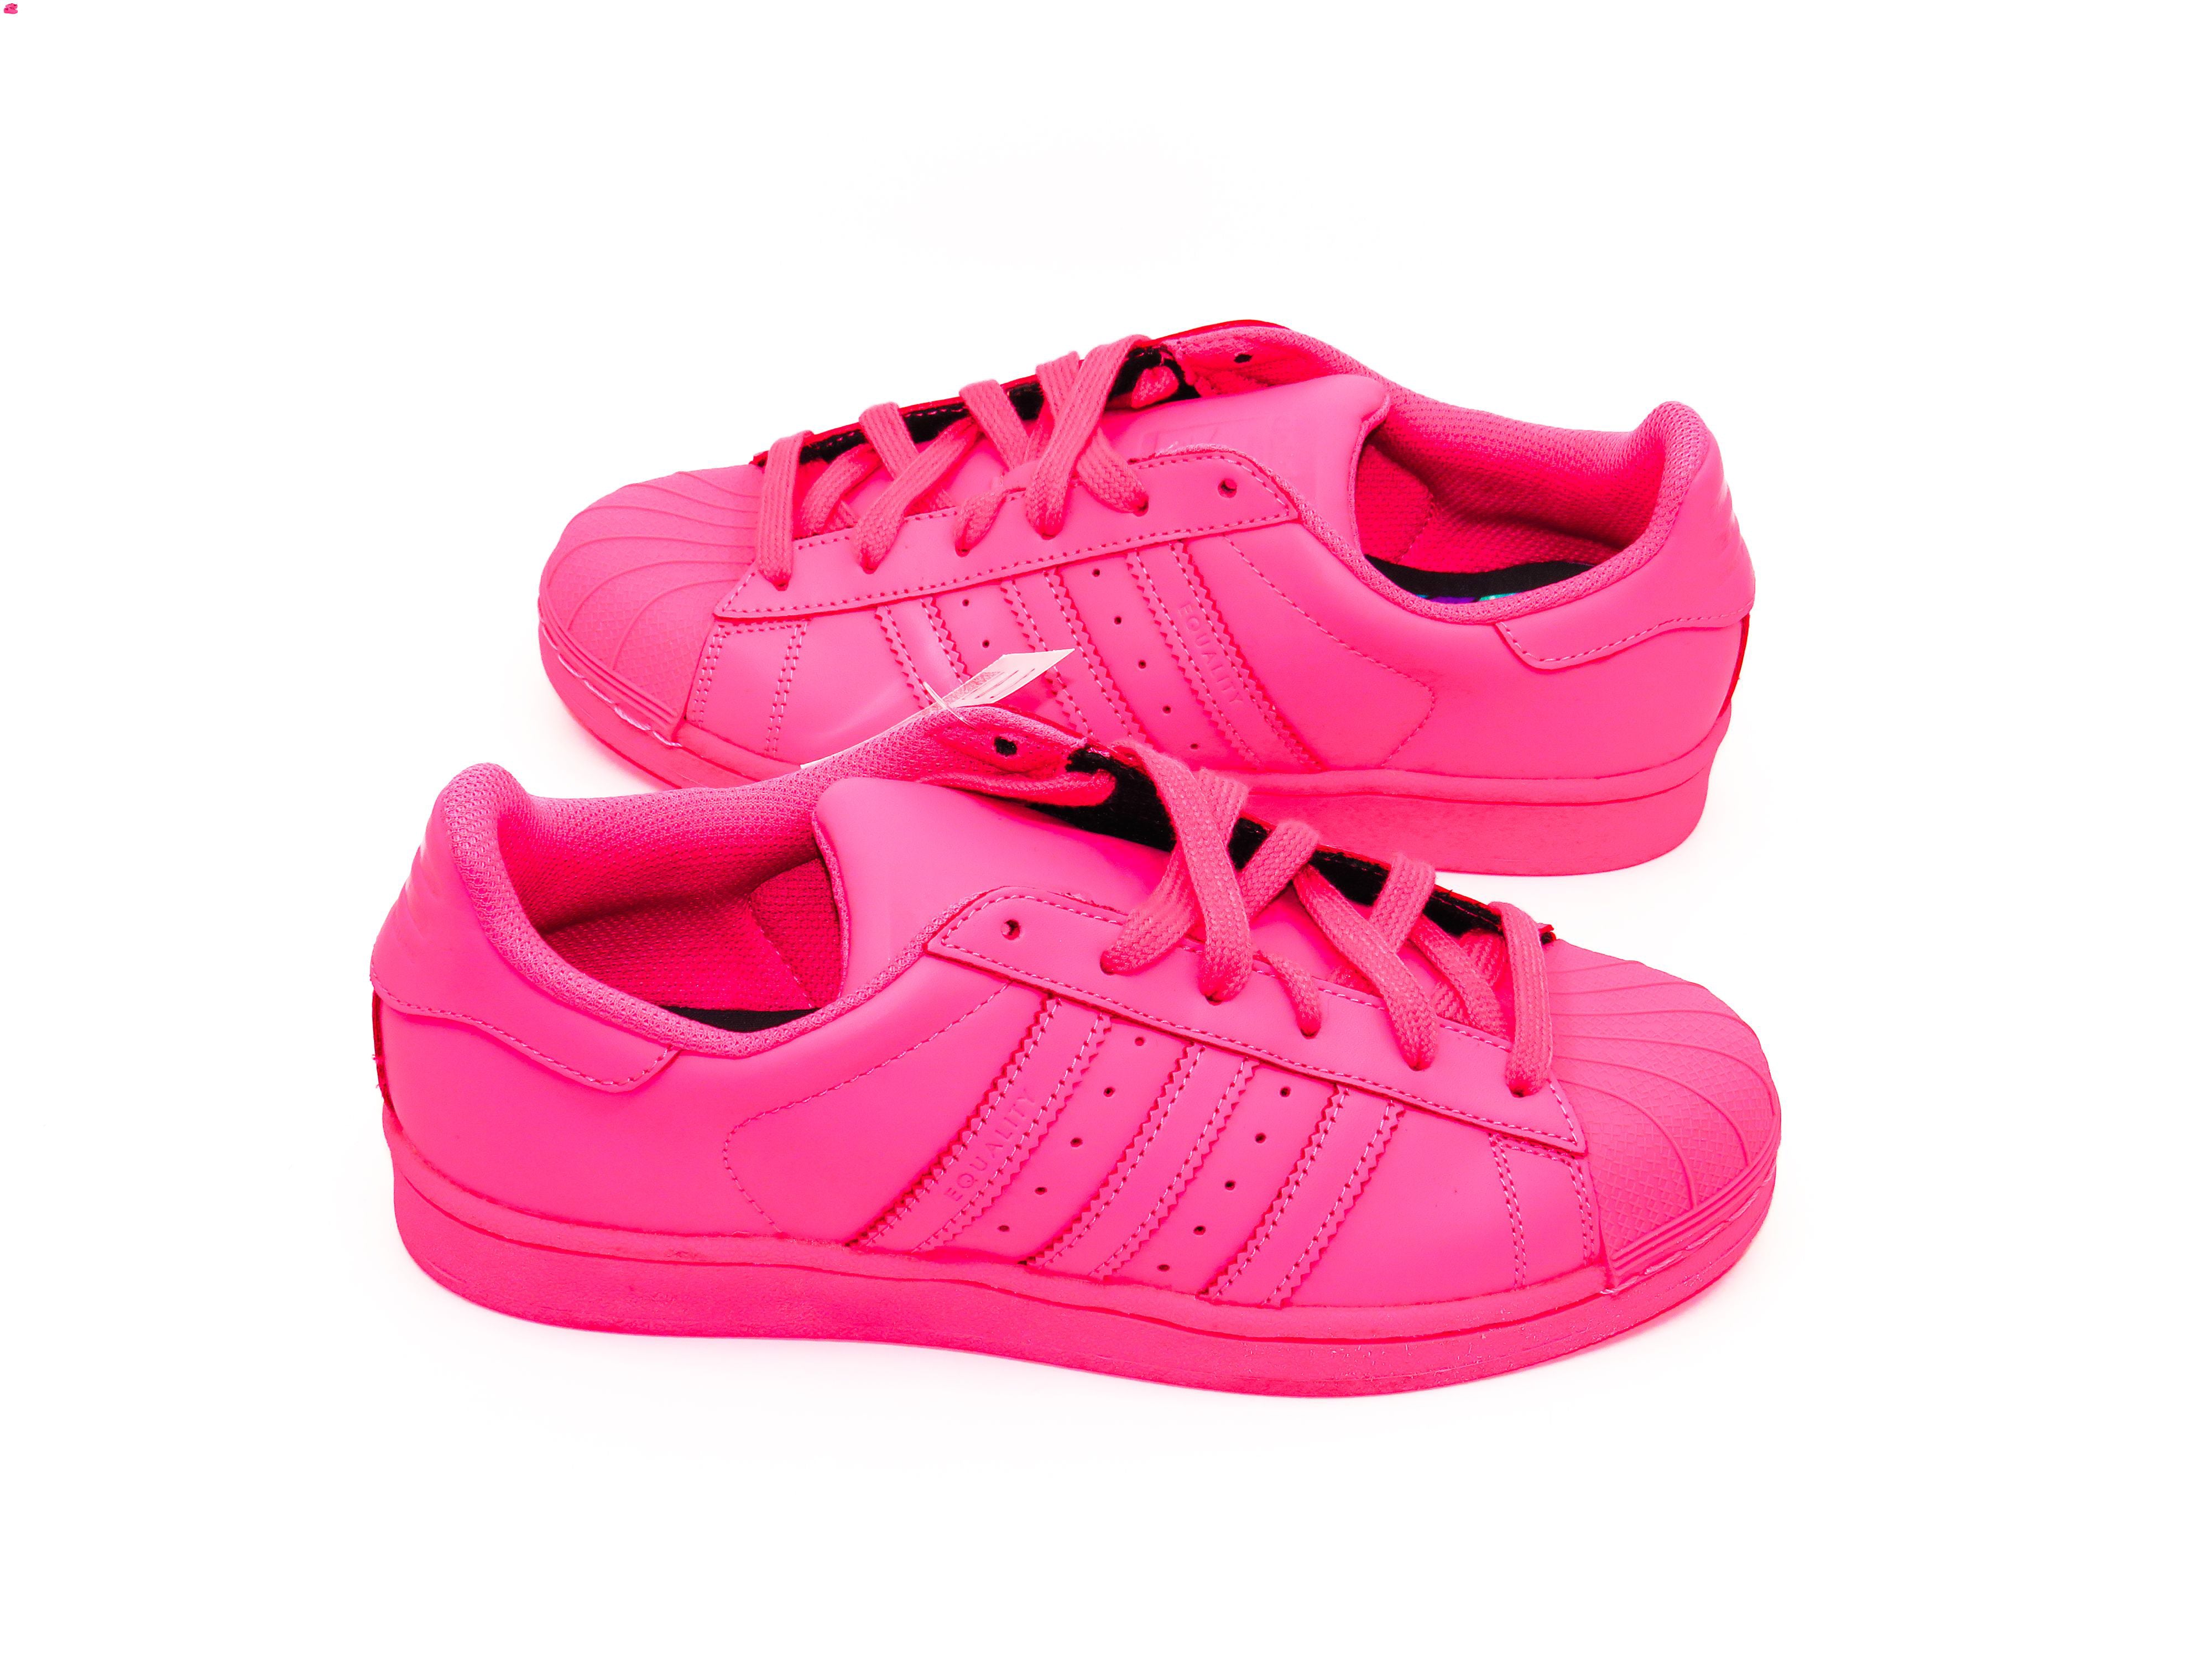 Superstar leather trainers Adidas x Pharrell Williams Pink size